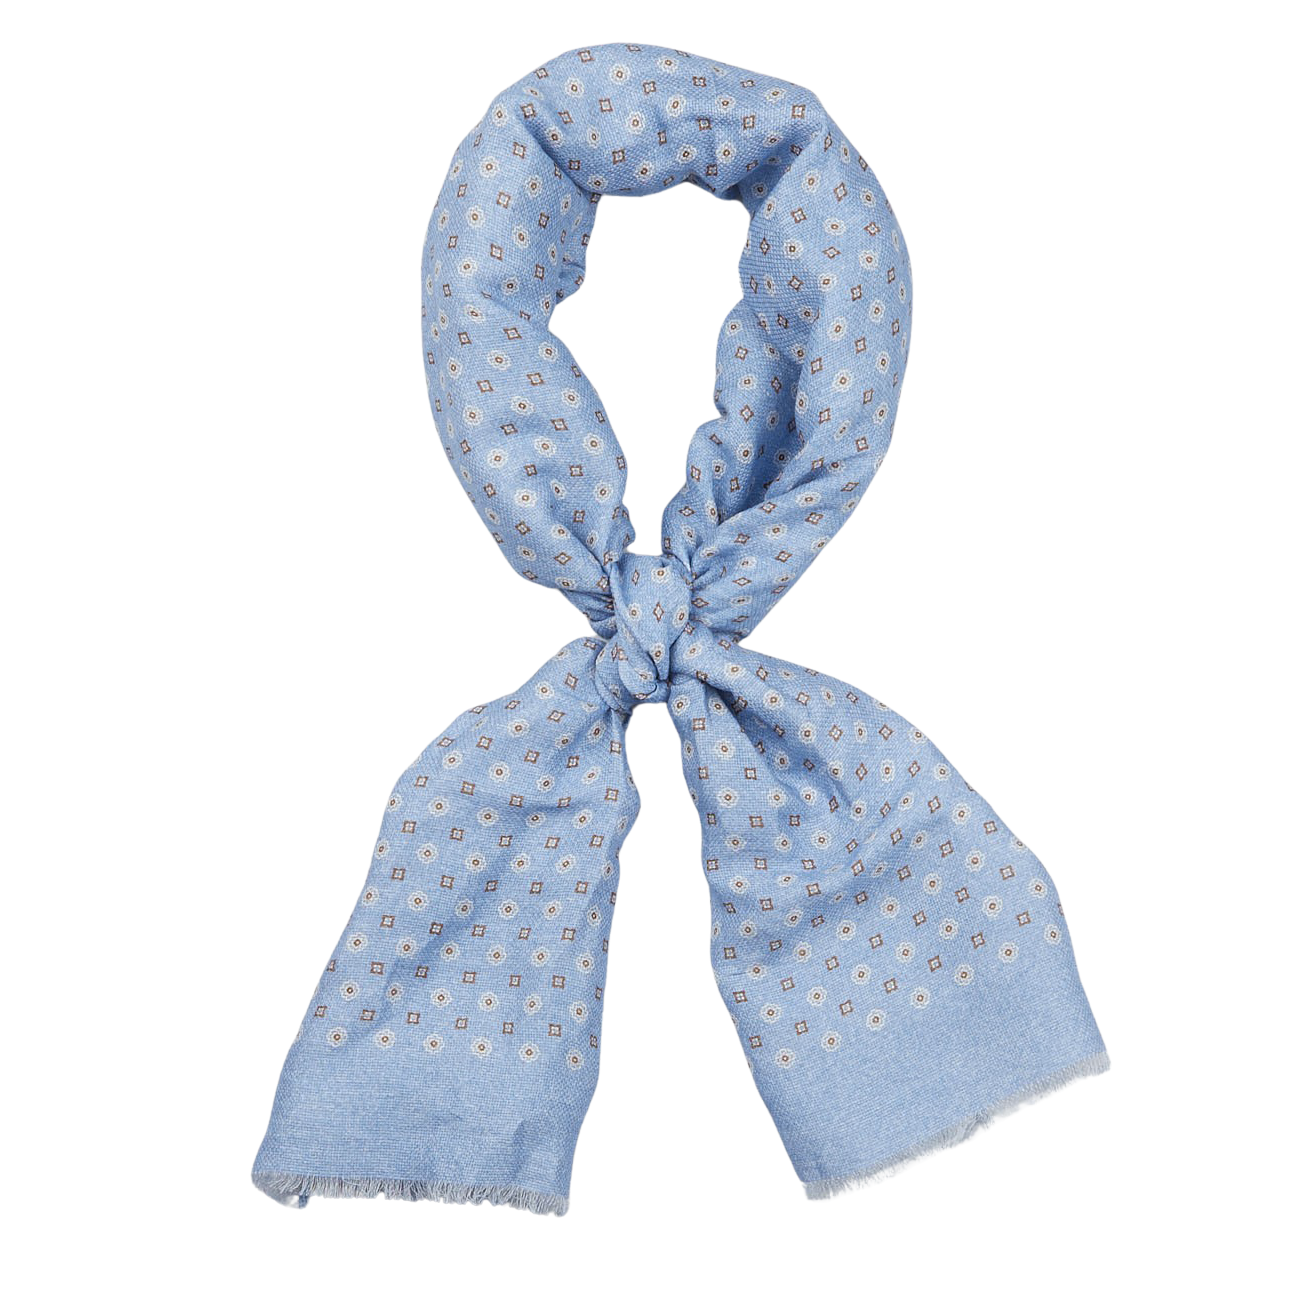 Amanda Christensen sky blue medallion printed cotton linen scarf with fringe tied in a knot against a white background.